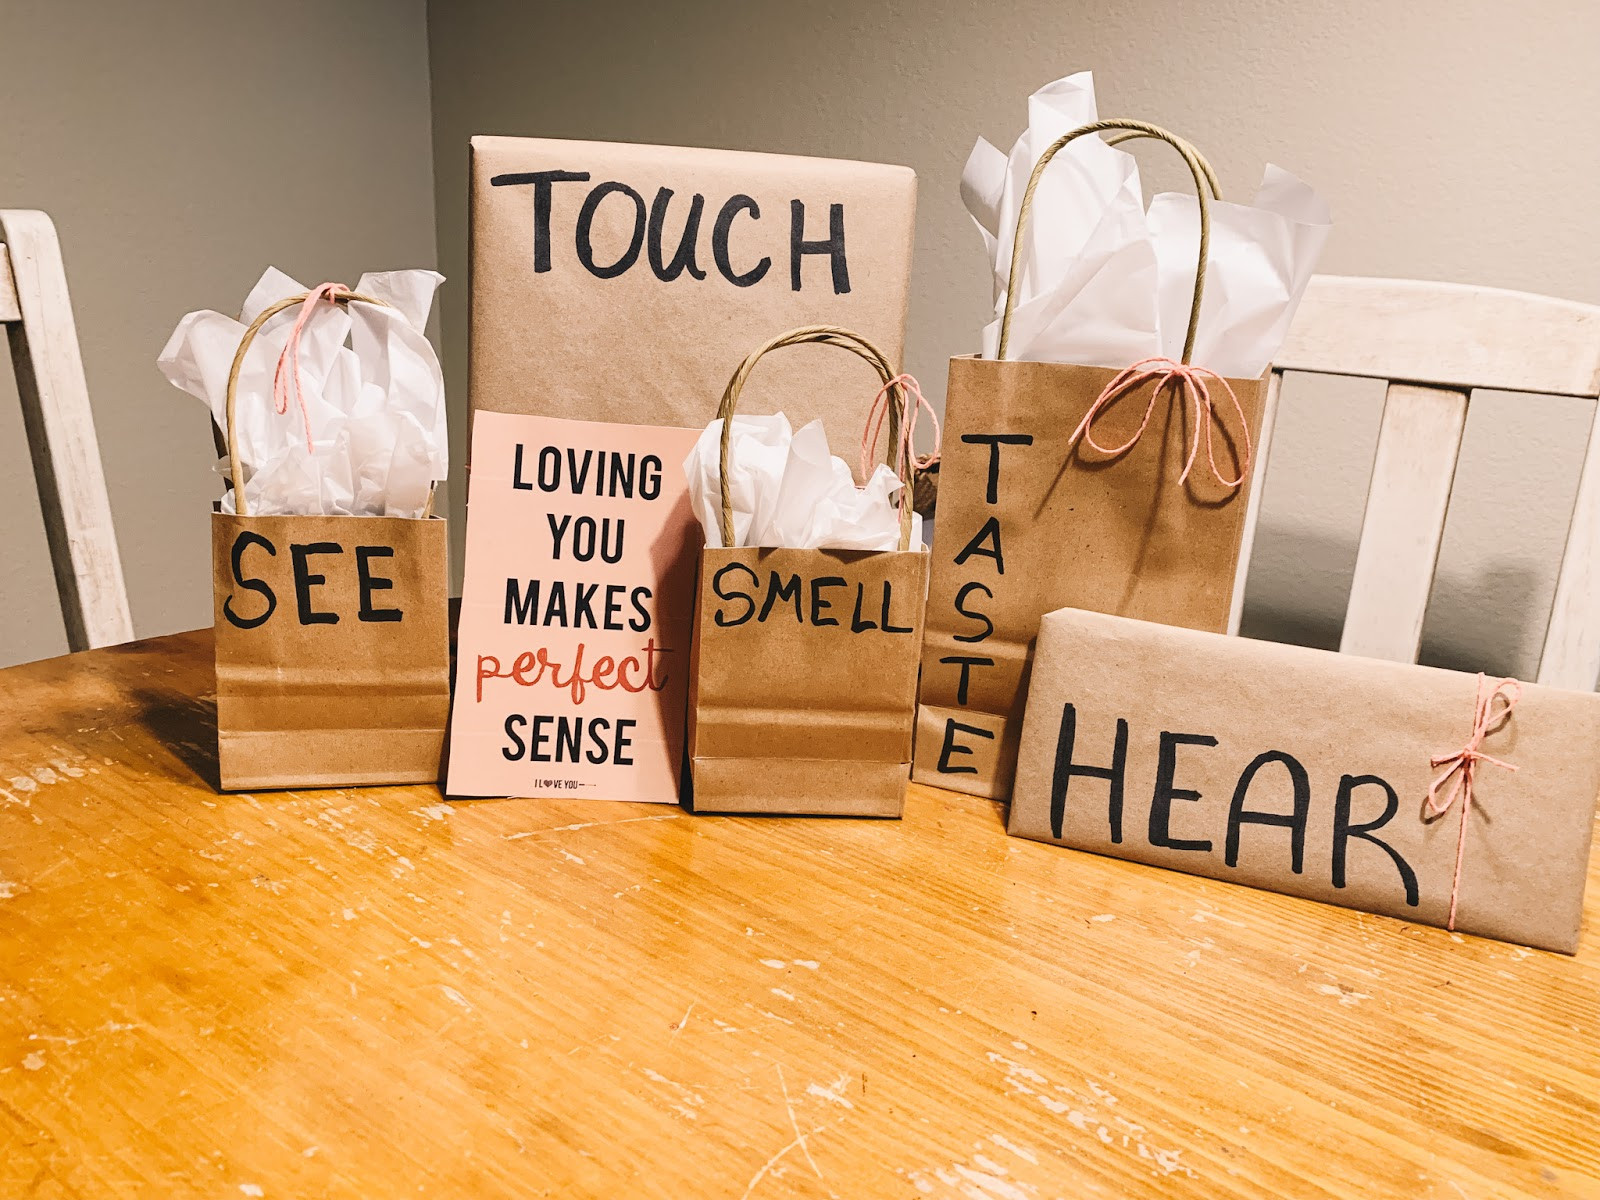 Valentine Gift Ideas To Make For Him
 The 5 Senses Valentines Day Gift Ideas for Him & Her